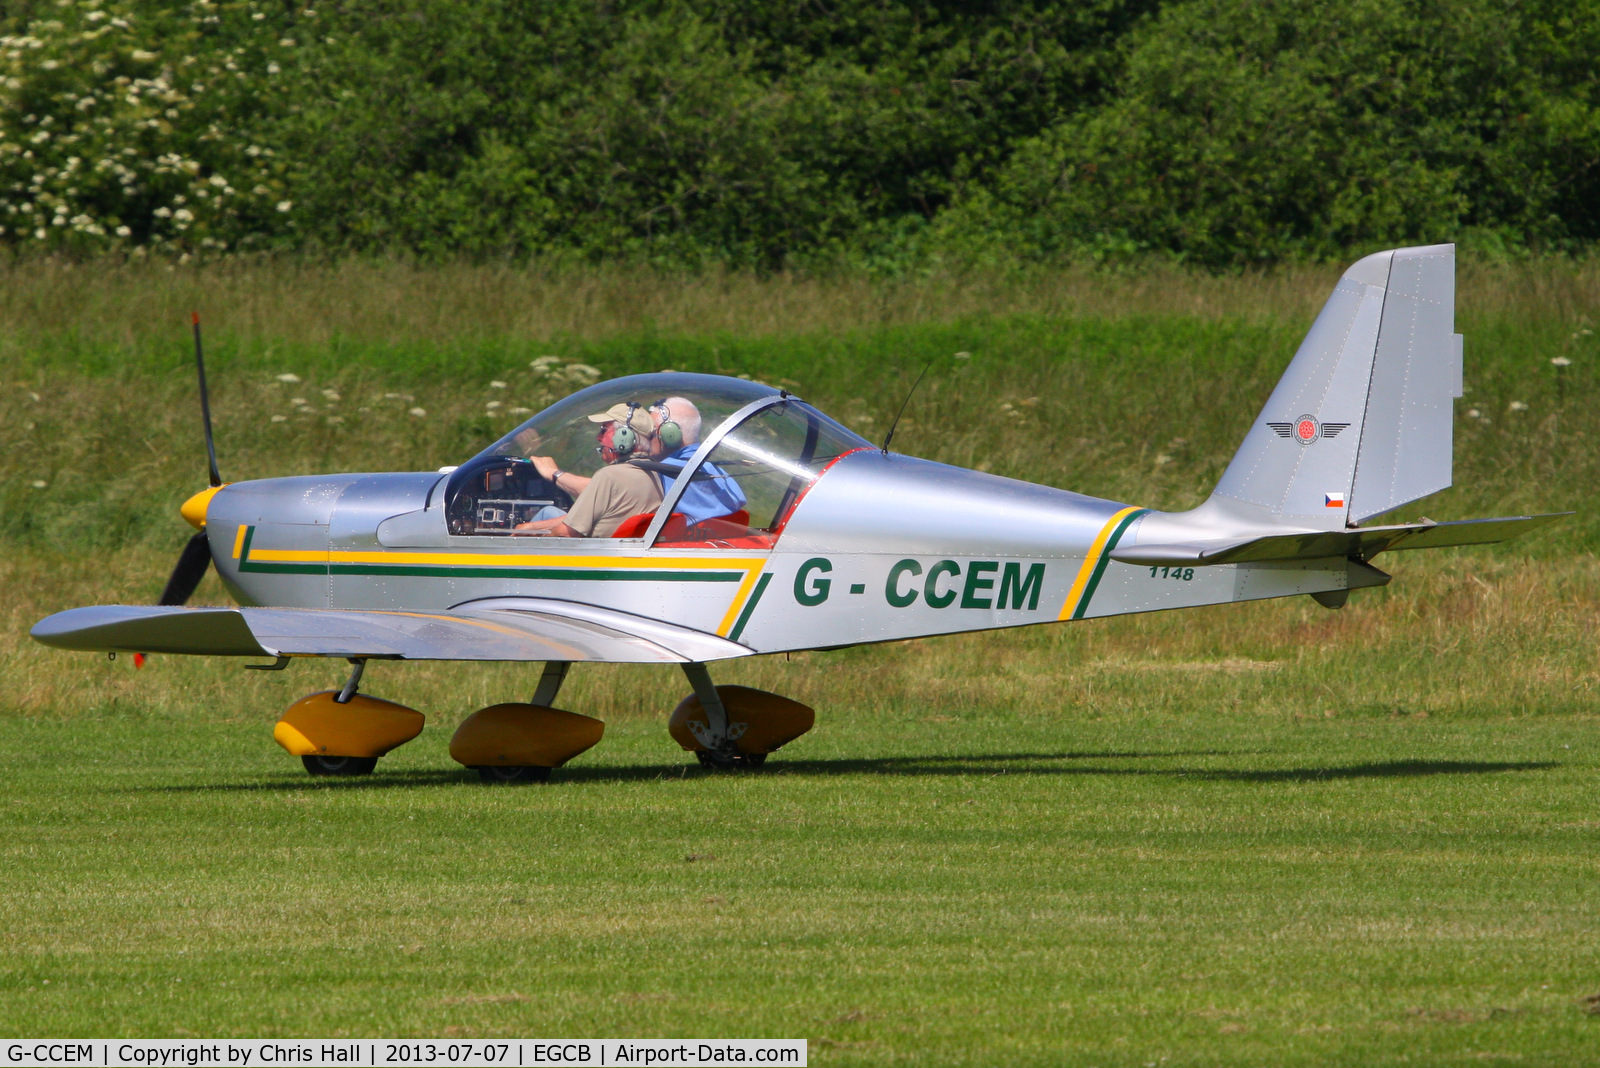 G-CCEM, 2003 Aerotechnik EV-97A Eurostar C/N PFA 315-13987, at the Barton open day and fly in